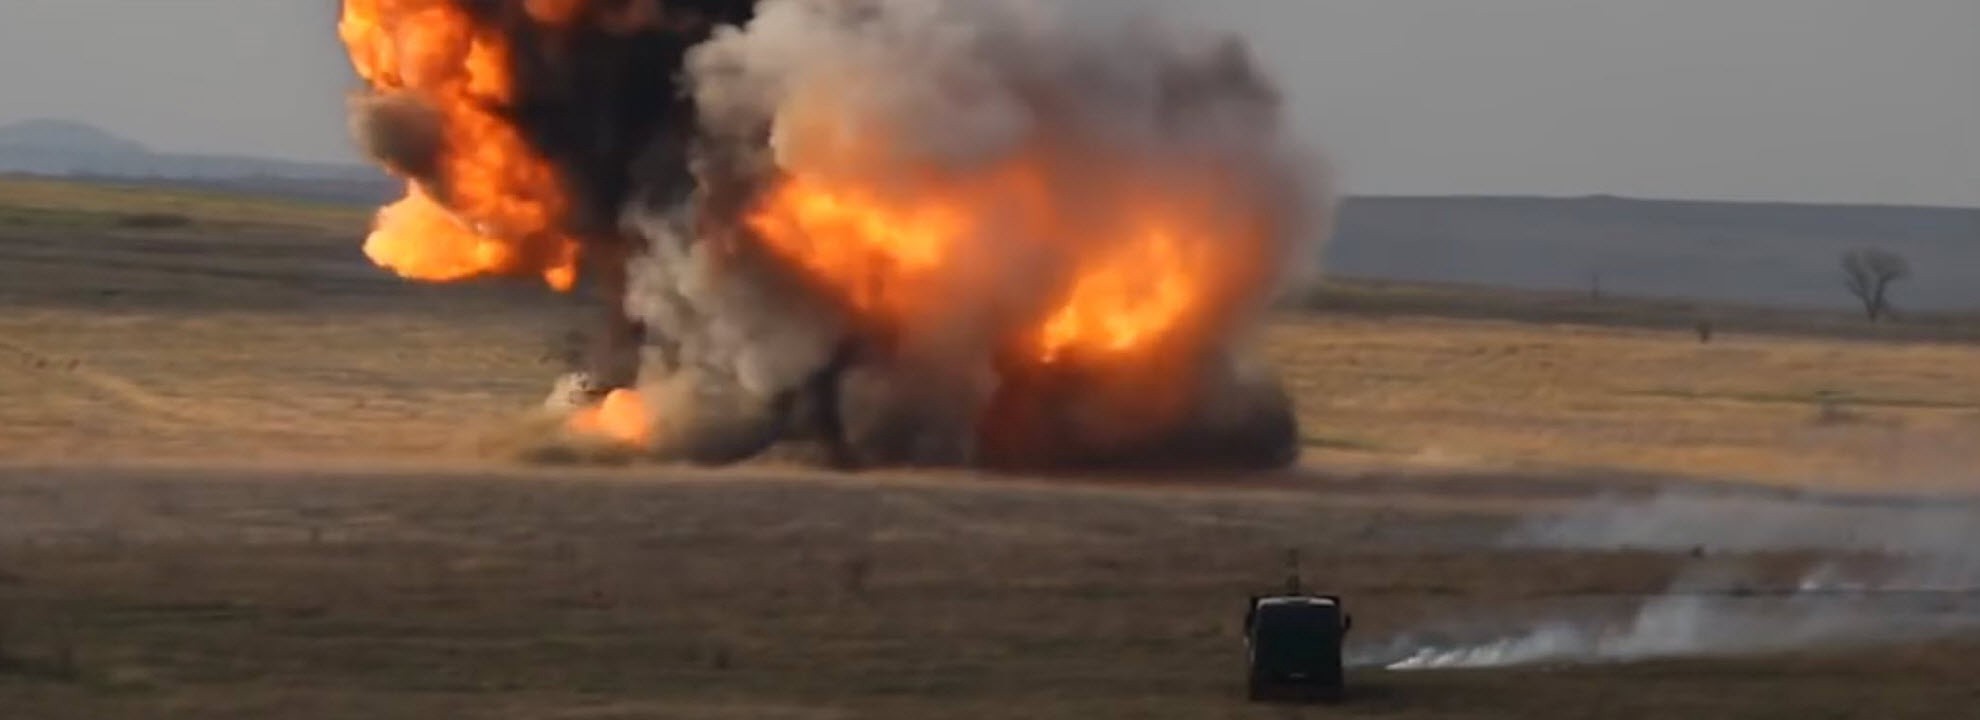 Russia-Backed Separatists Conduct Explosive Training Exercises